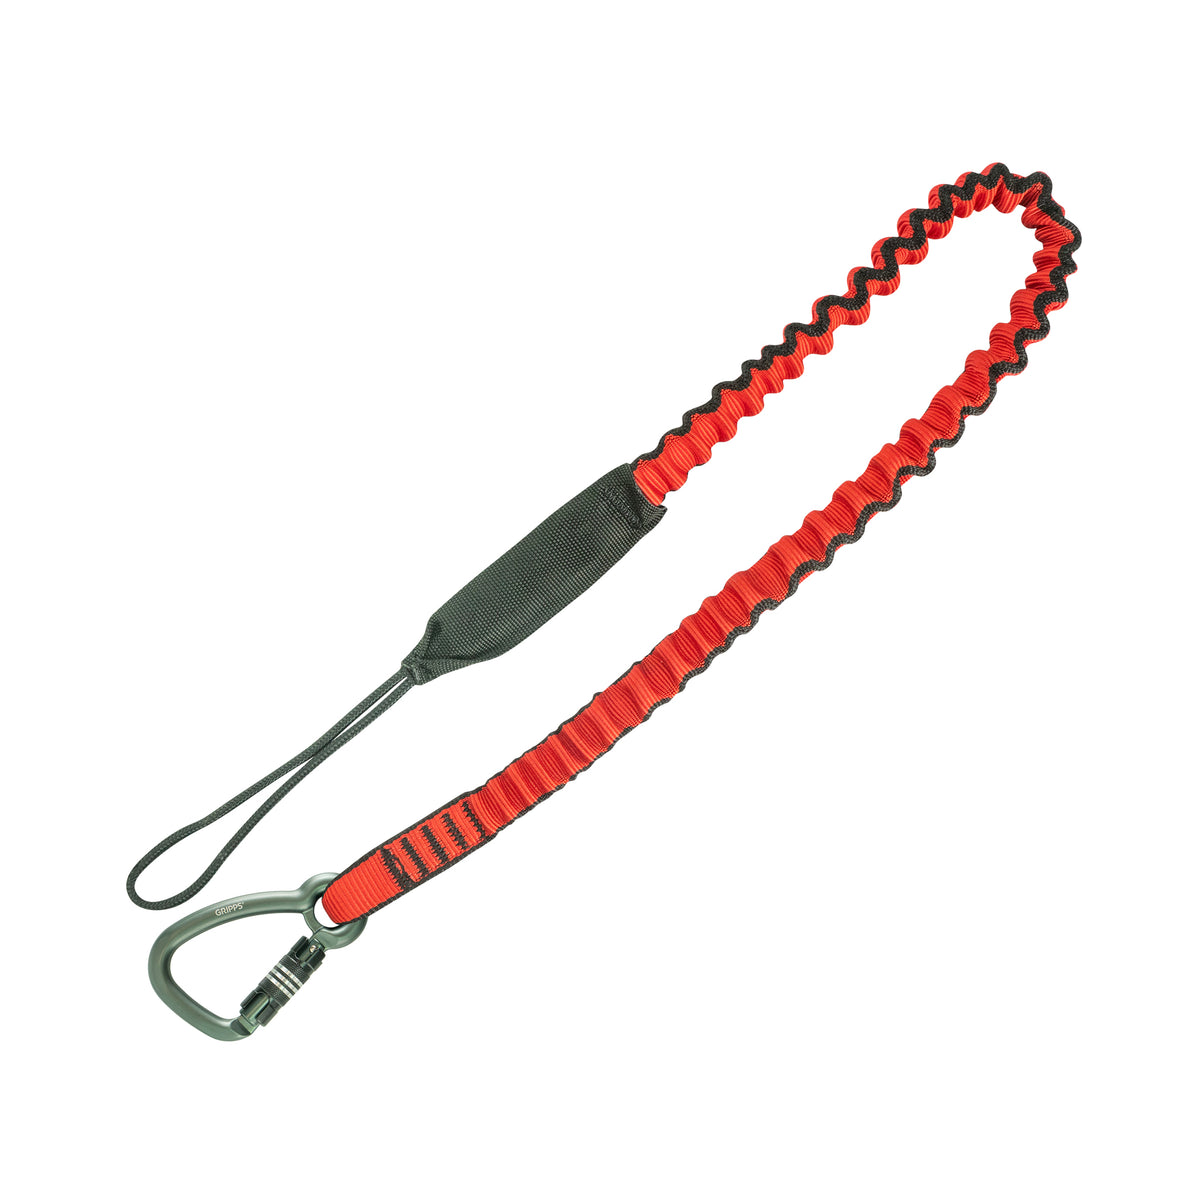 Bungee Tether Triple-Action Carabiner - 18kg / 40lb